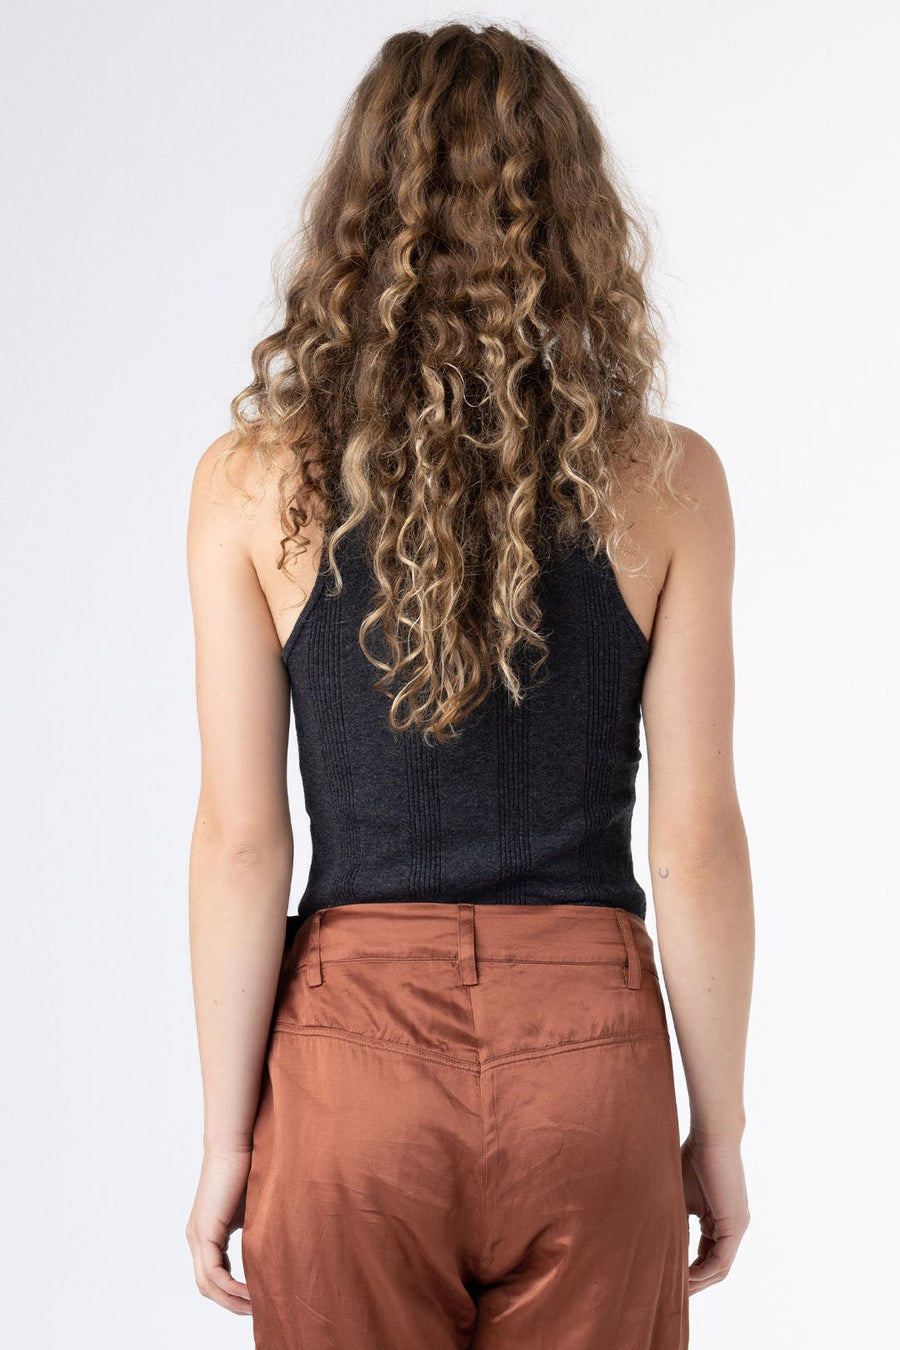 HONEYCOMB KNIT CAMI, CHARCOAL - Burning Torch Online Boutique